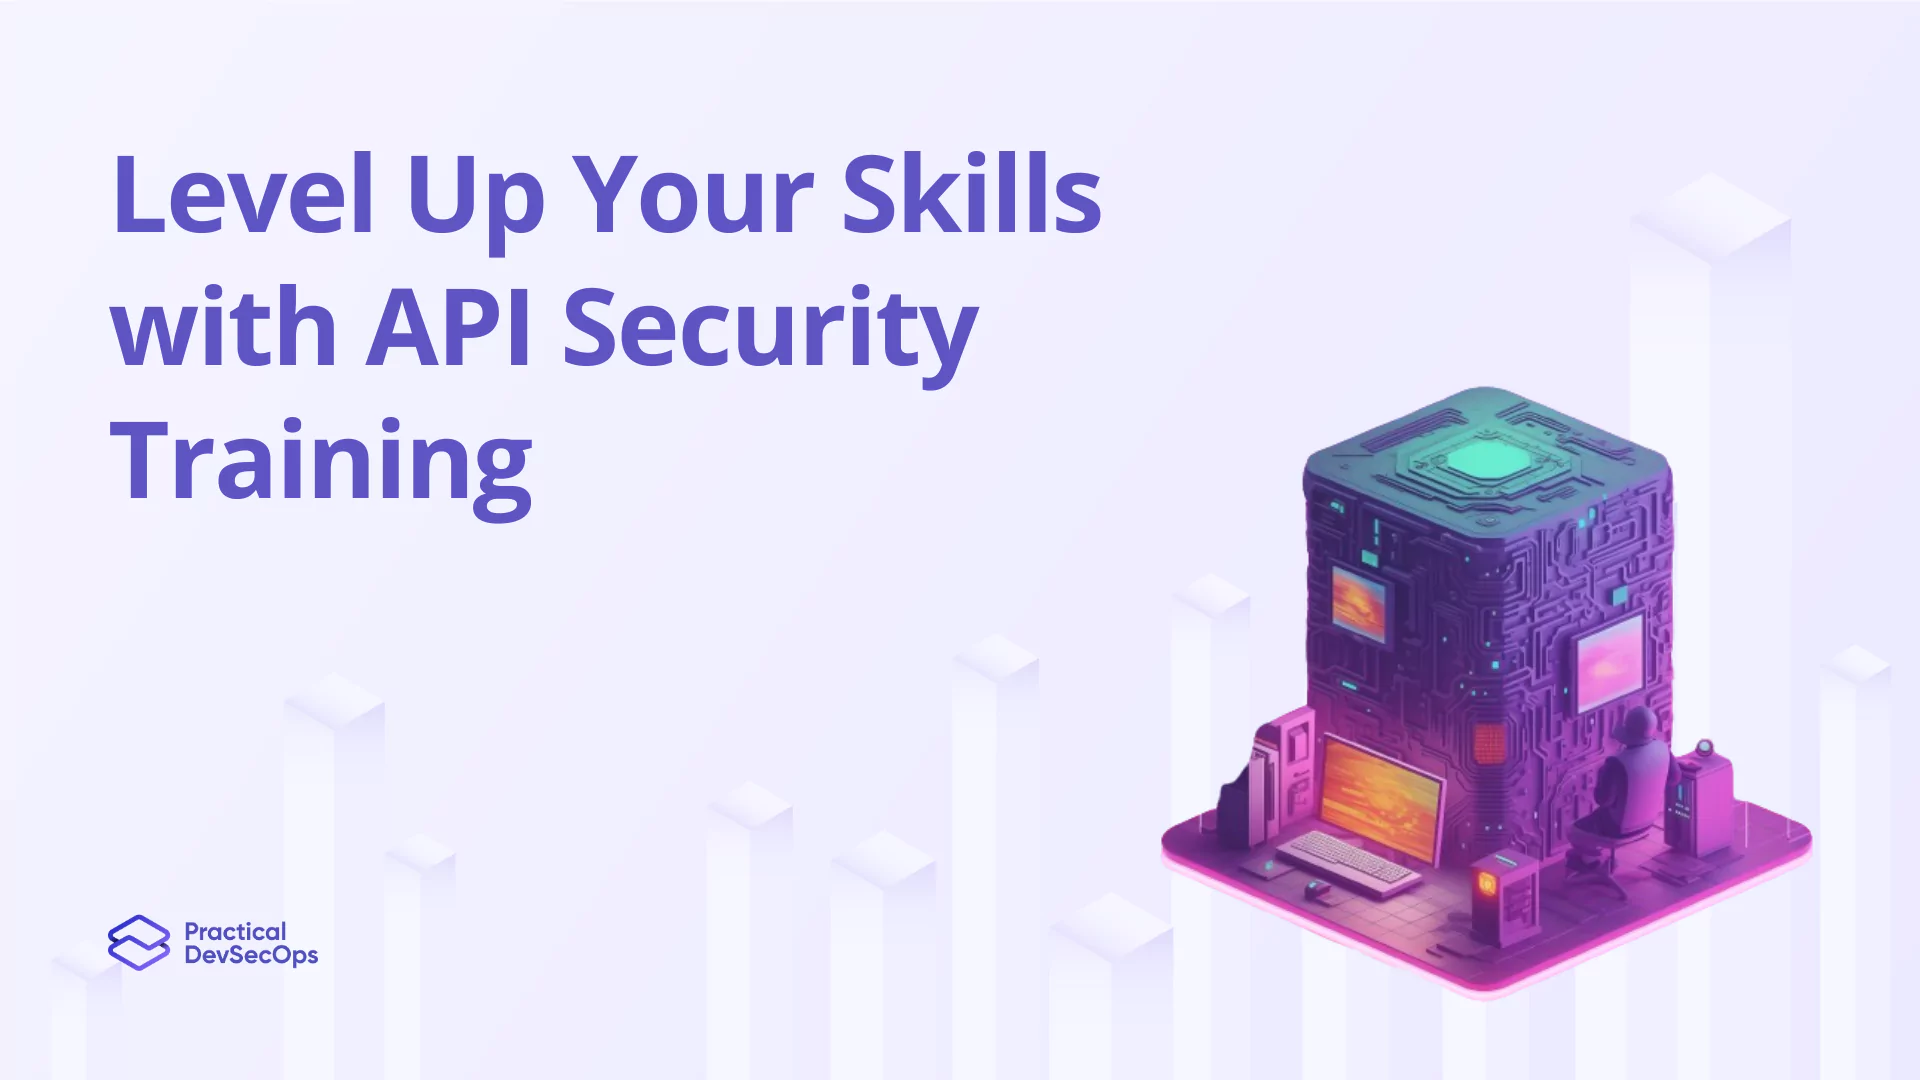 Level Up Your Skills with API Security Training at Practical DevSecOps